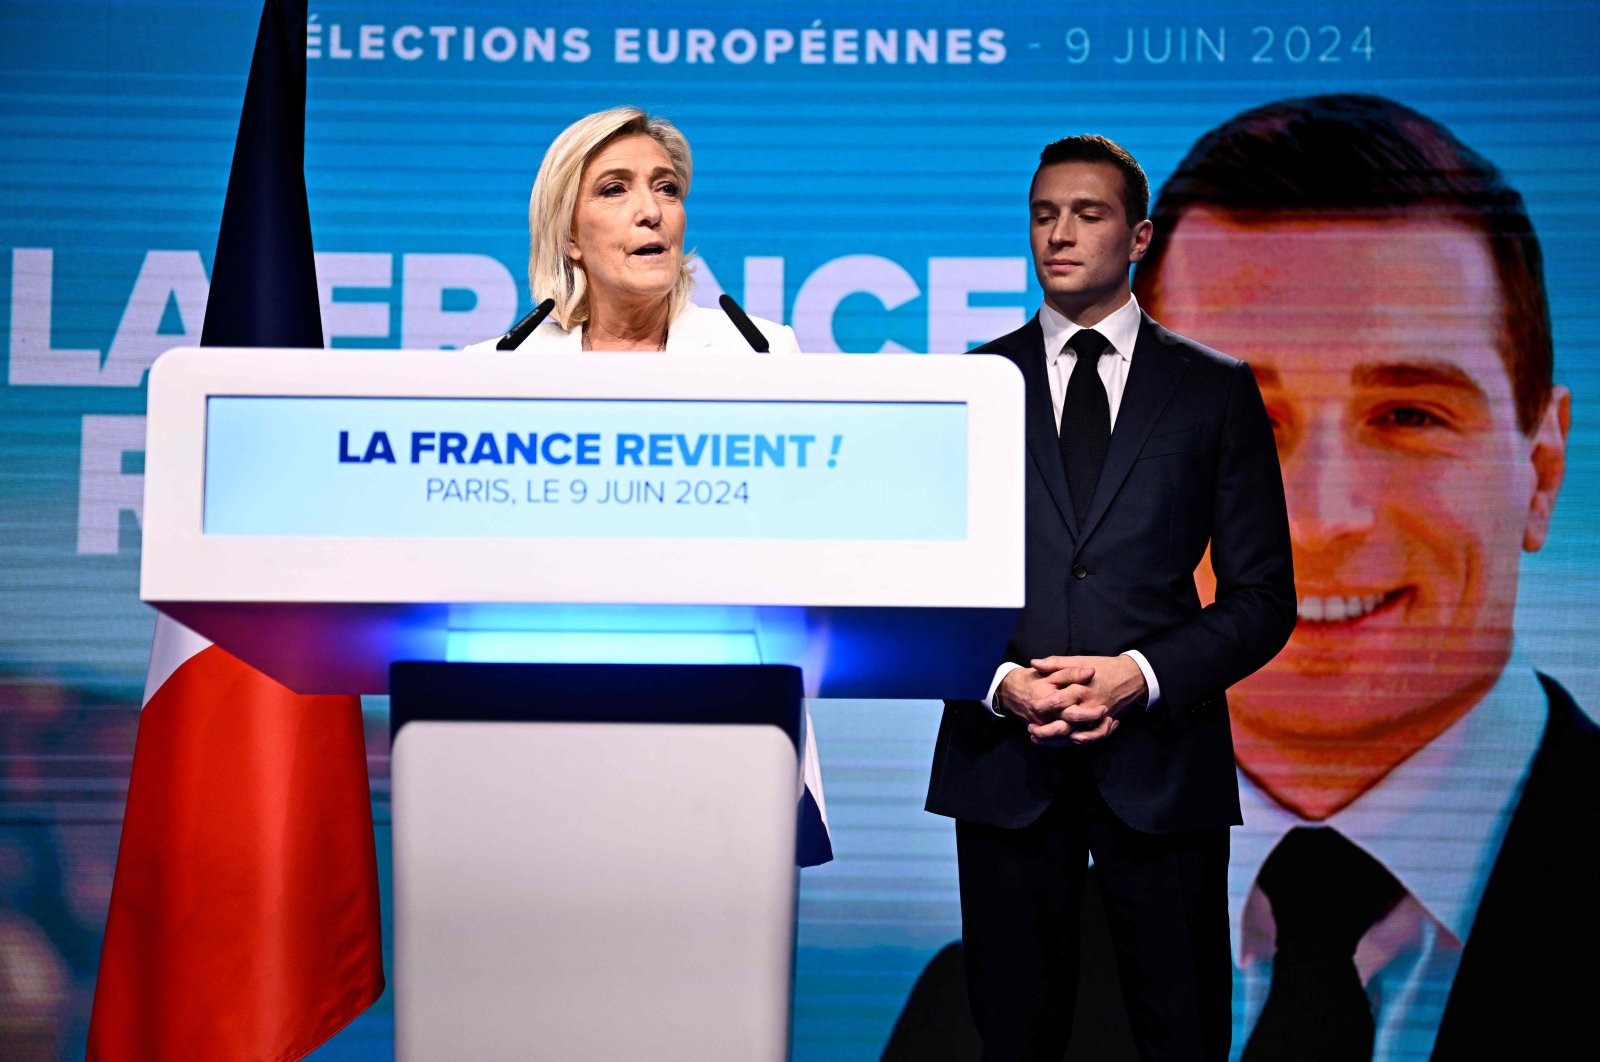 French far-right Rassemblement National (RN) party leader Marine Le Pen (L) addresses members as party President Jordan Bardella listens, in Paris, France, June 9, 2024. (AFP Photo)